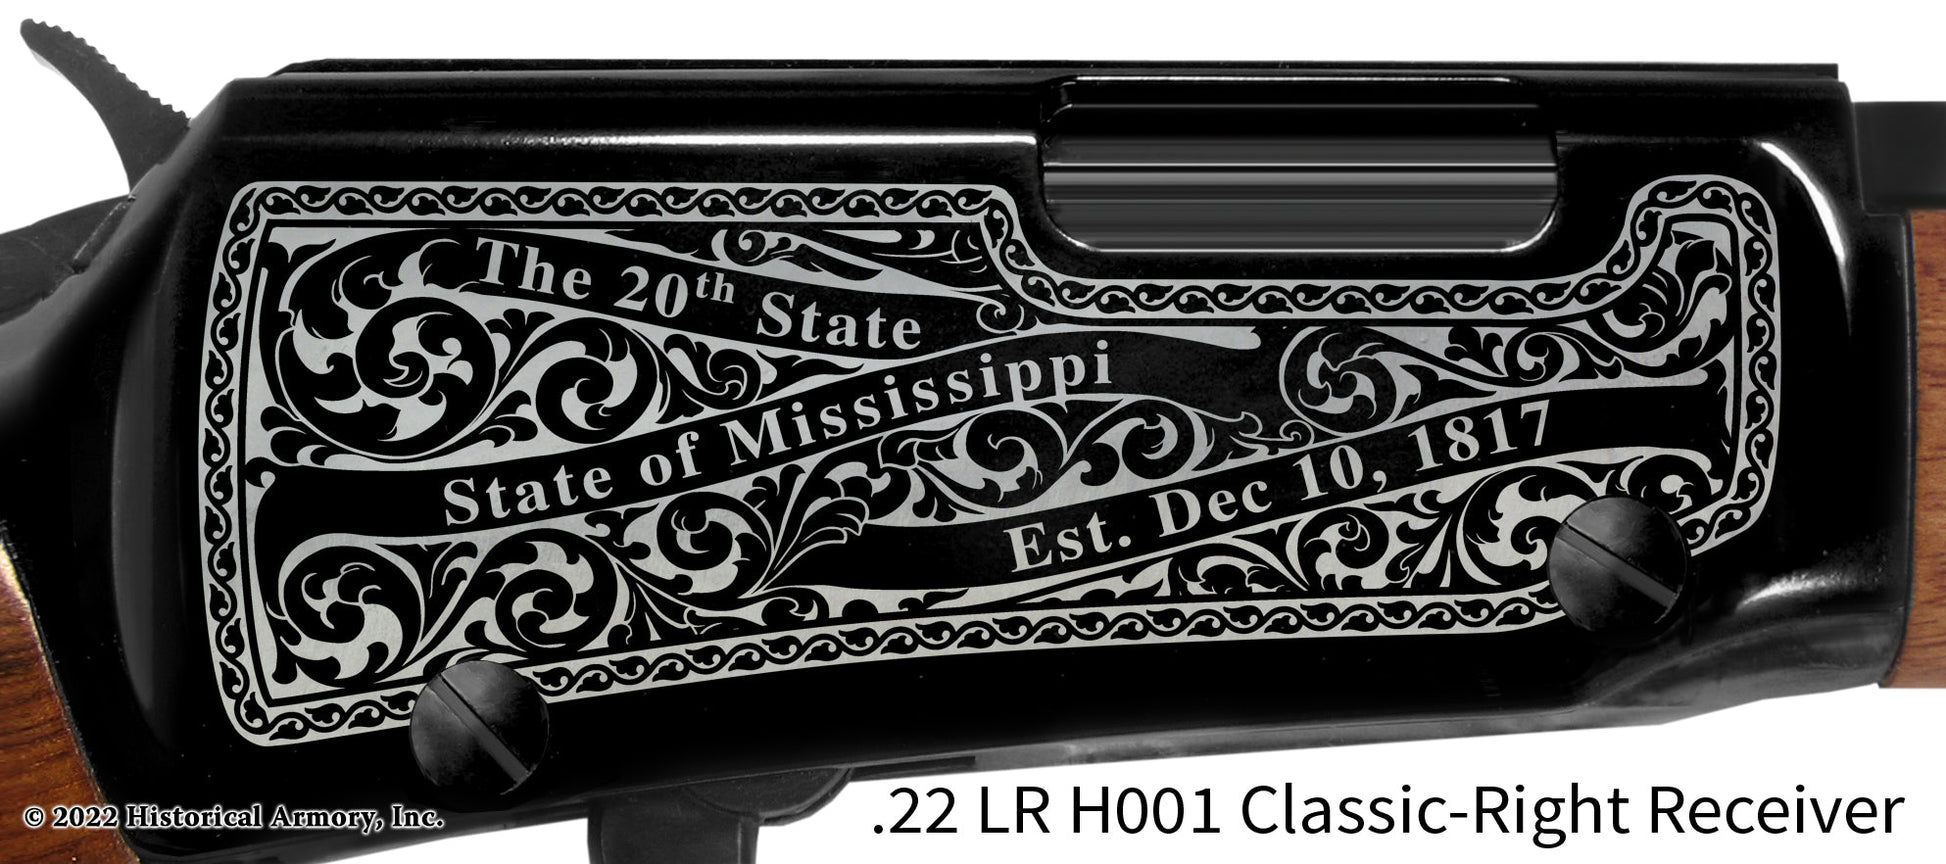 Tate County Mississippi Engraved Henry H001 Rifle